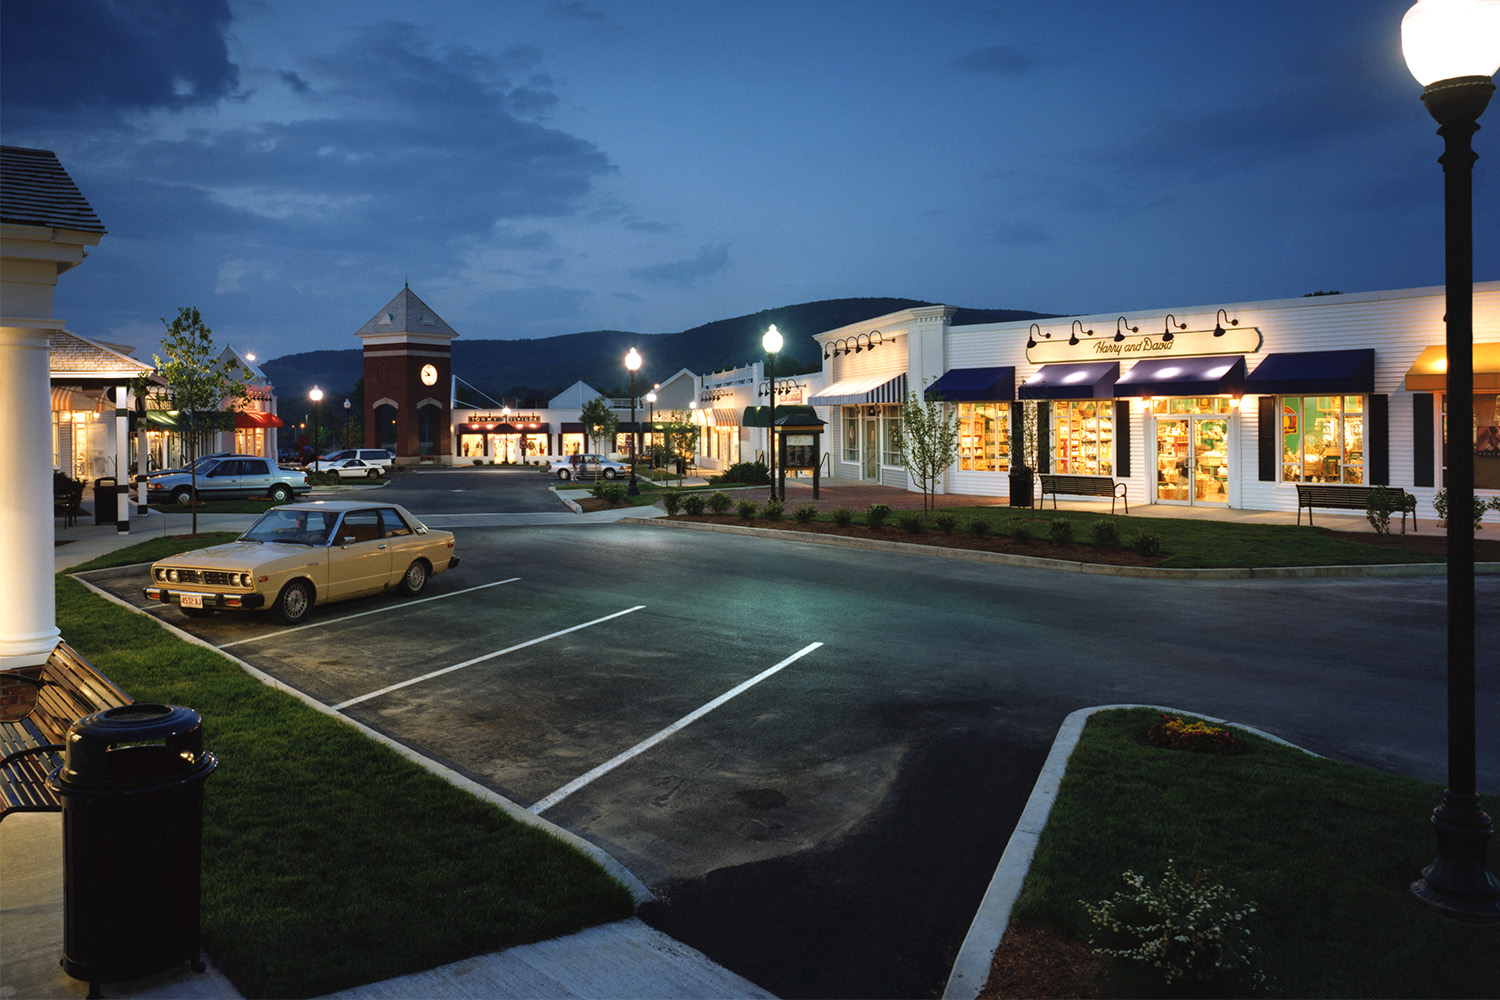 Nighttime view of Berkshire shopping outlet, seen from across parking lot 